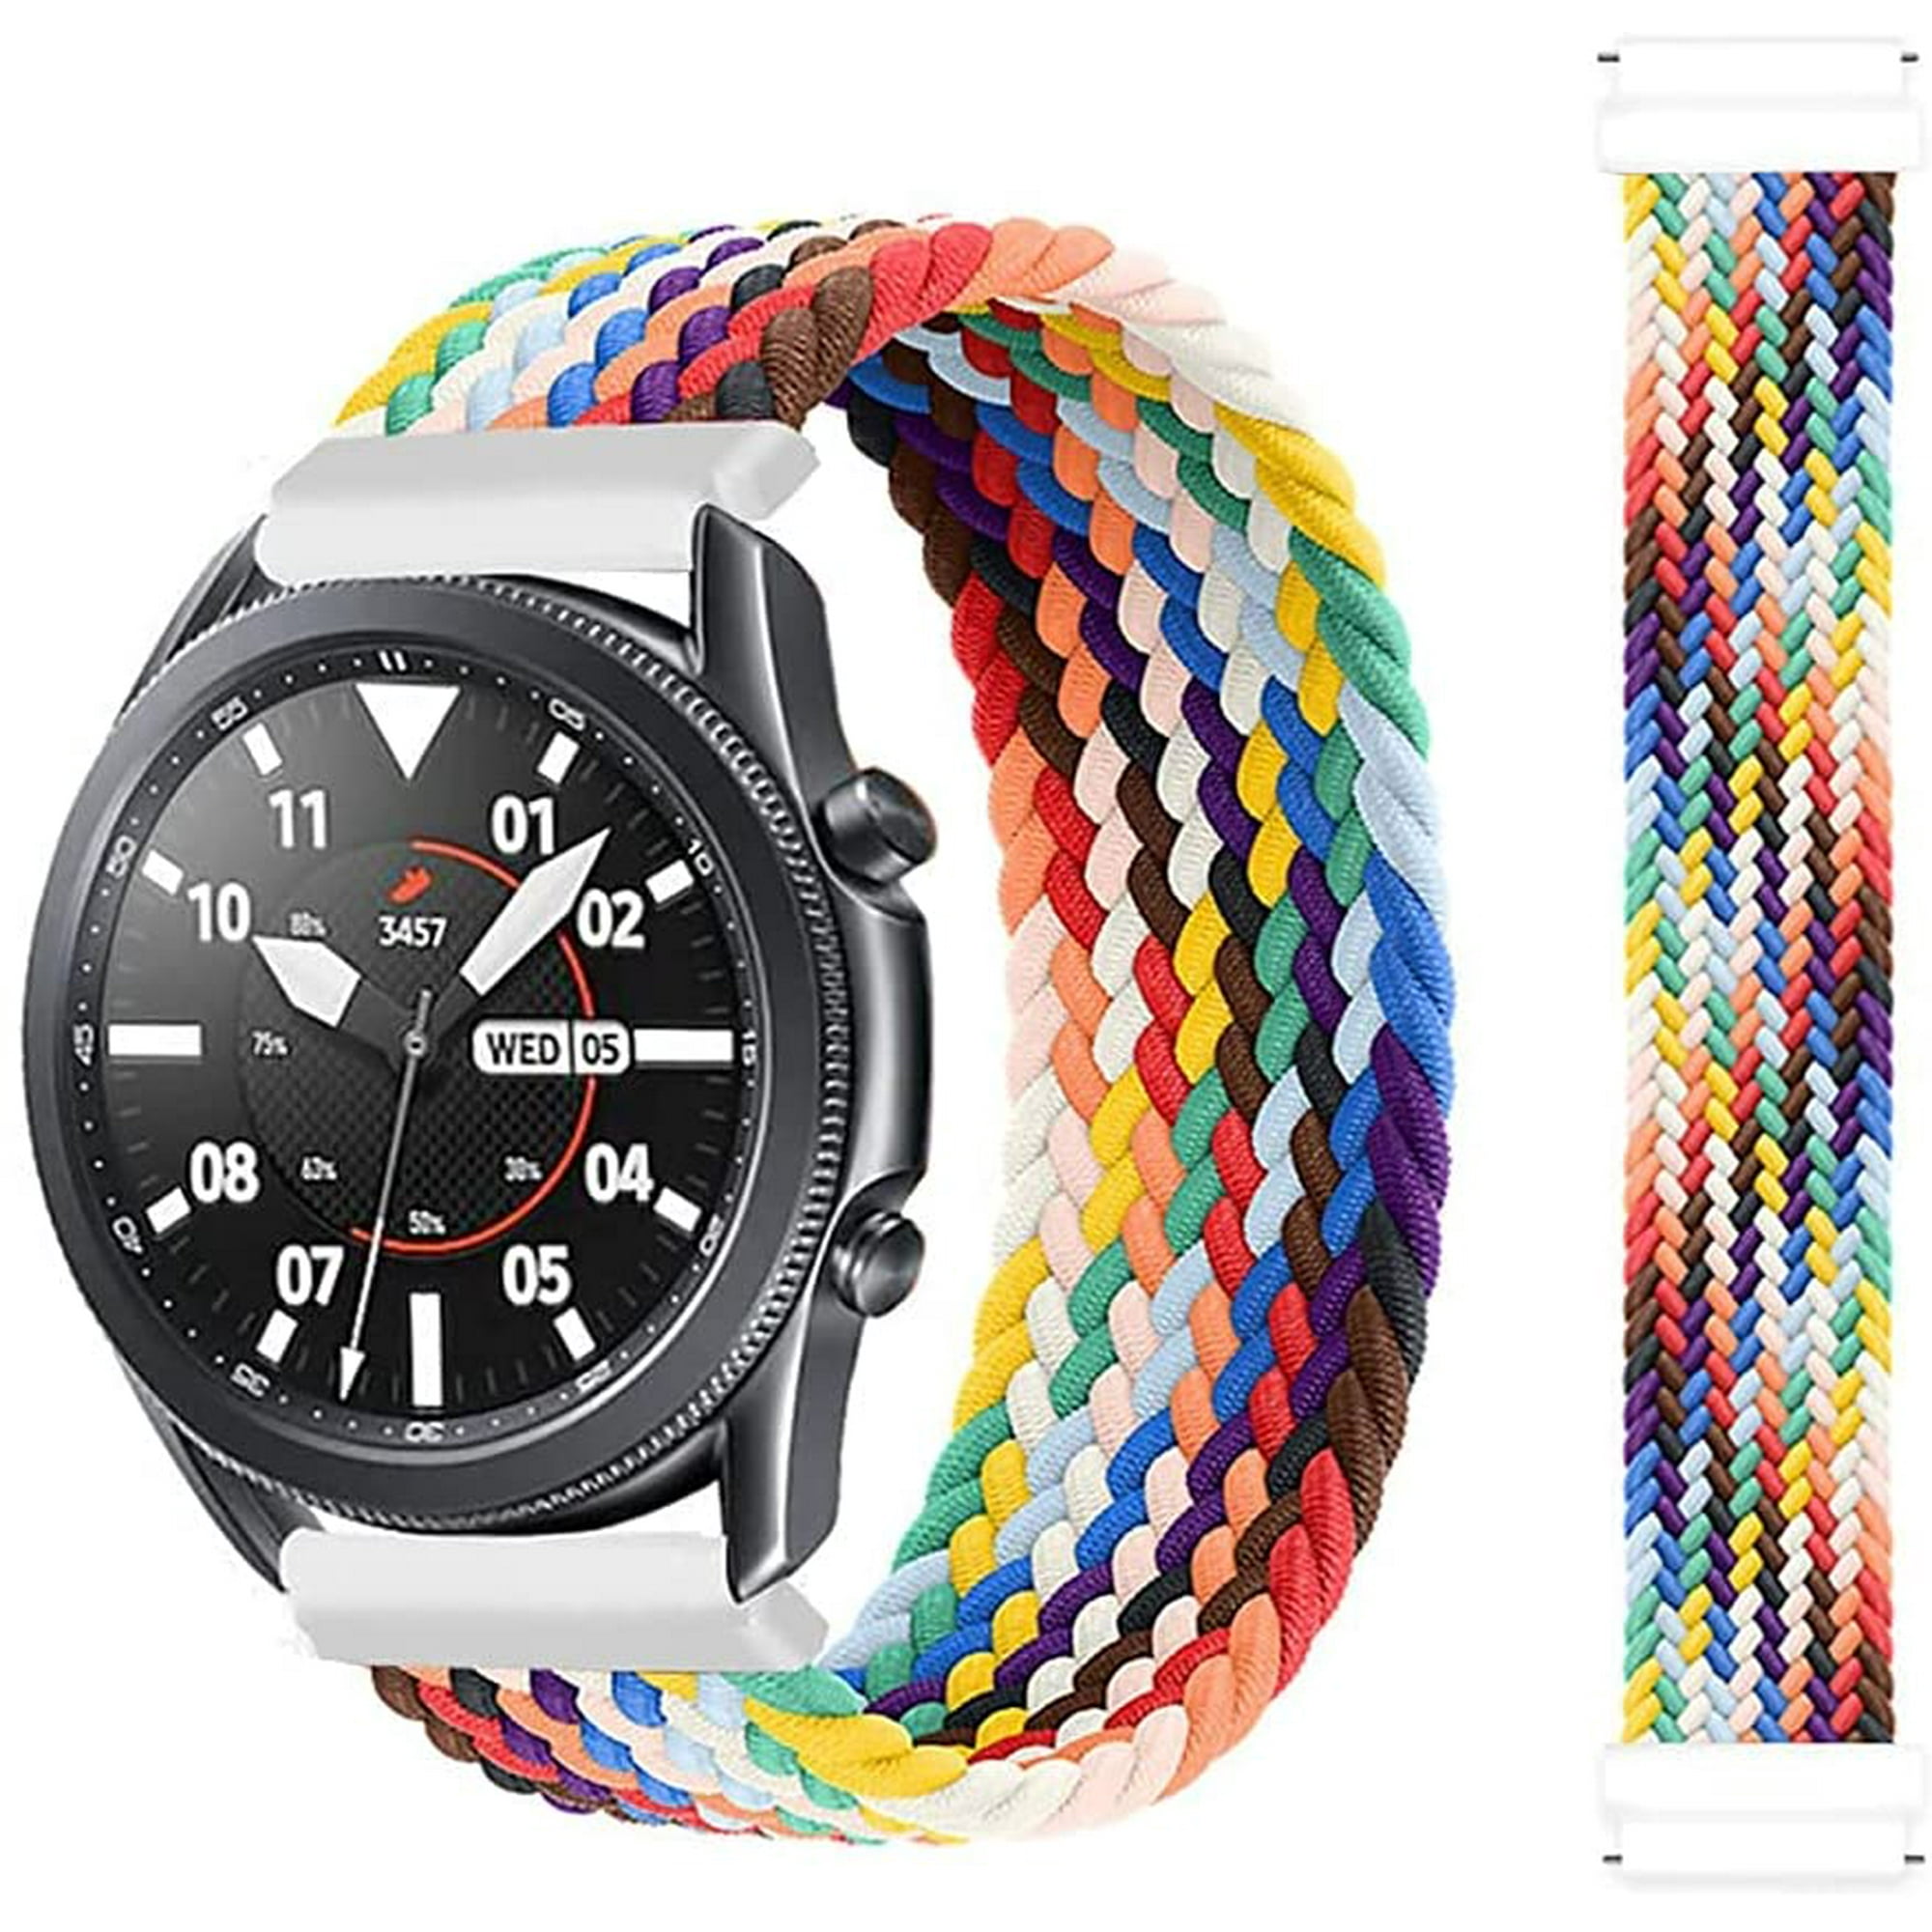 Braided Solo Loop mm Compatible For Samsung Galaxy Watch 4 4 Classic Galaxy Watch 3 41mm Galaxy 42mm Galaxy Watch Active 2 1 Stretchable Interwoven Silicone Fabric Sports Strap mm Walmart Canada